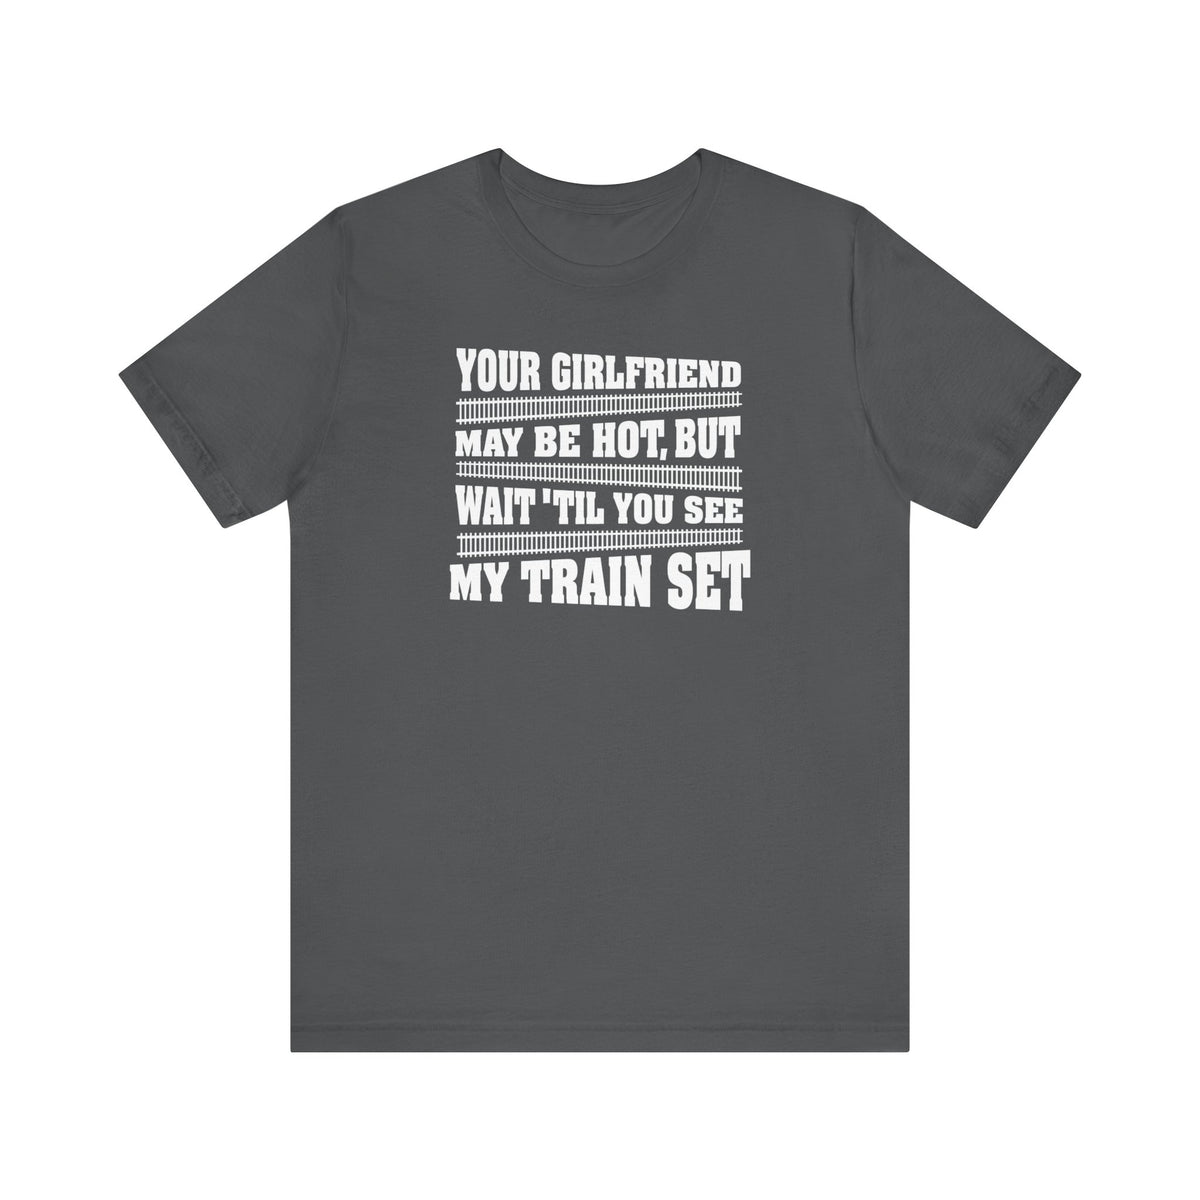 Your Girlfriend May Be Hot But Wait Till You See My Train Set - Men's T-Shirt